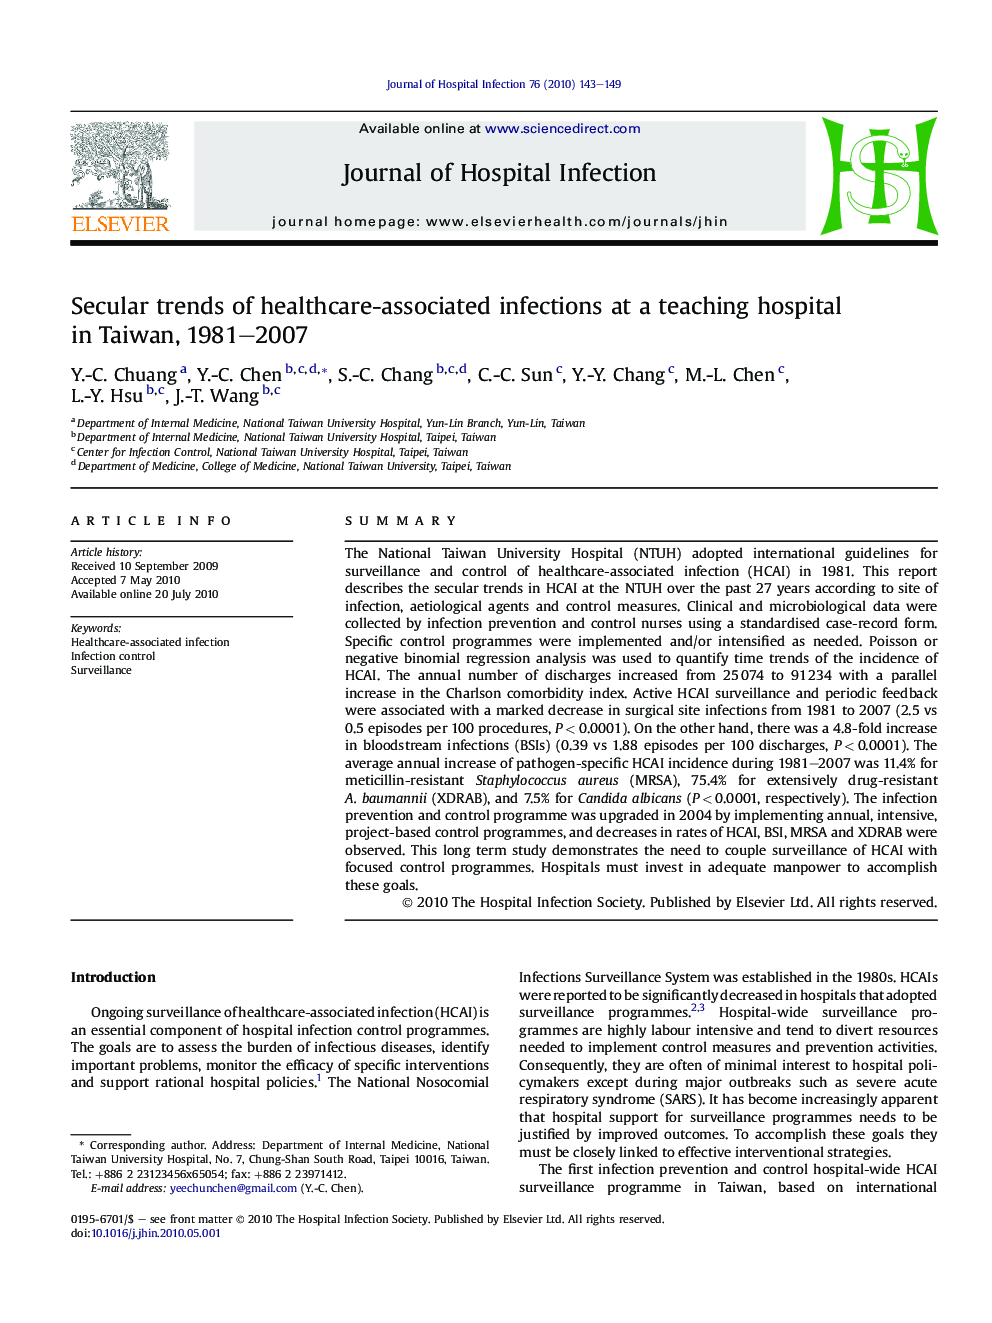 Secular trends of healthcare-associated infections at a teaching hospital in Taiwan, 1981–2007